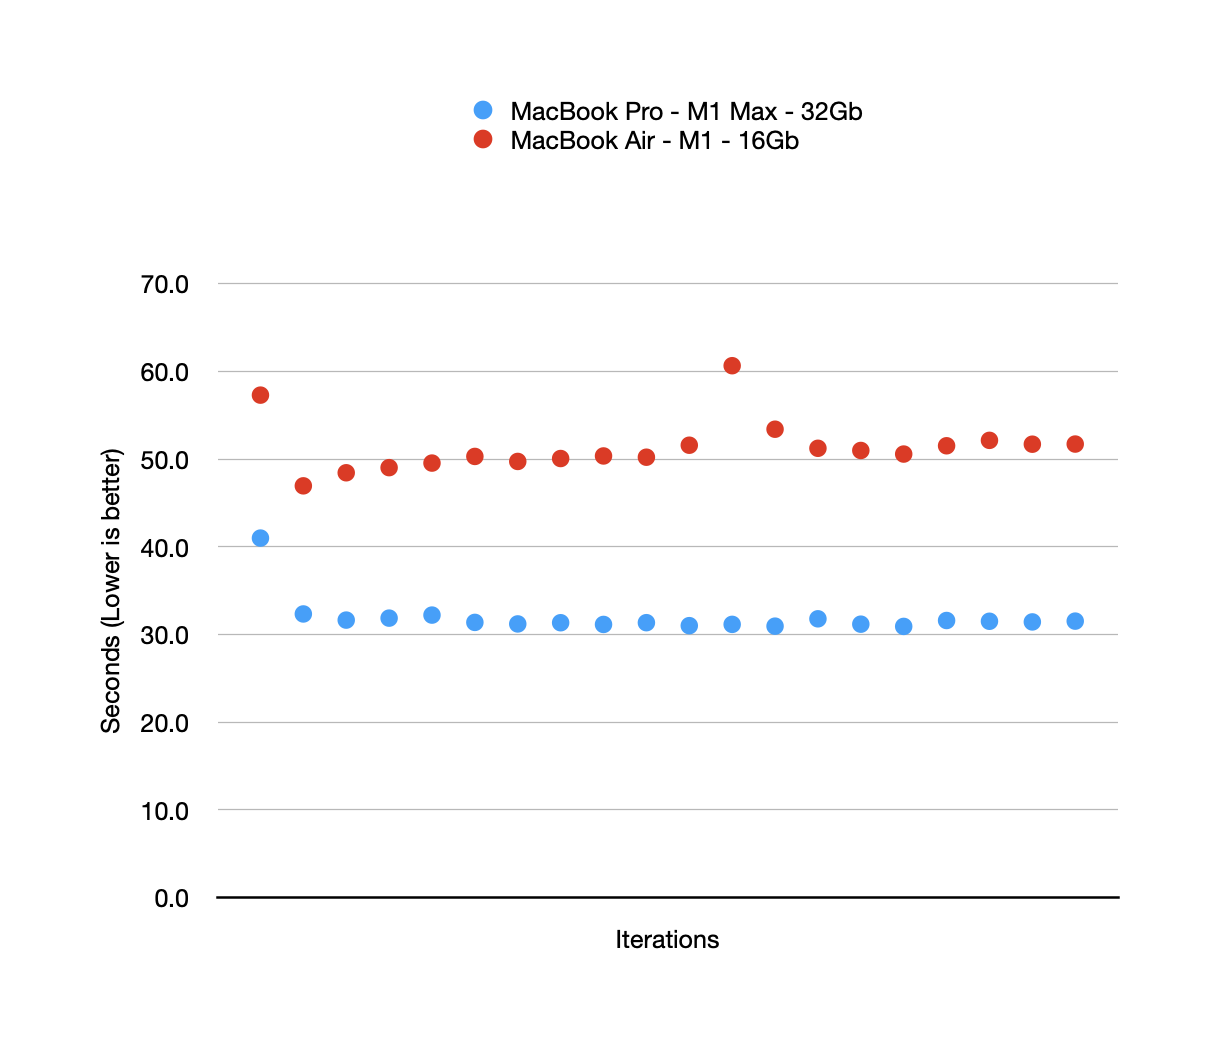 A chart showing just the build benchmarks for the M1-based MacBook Air